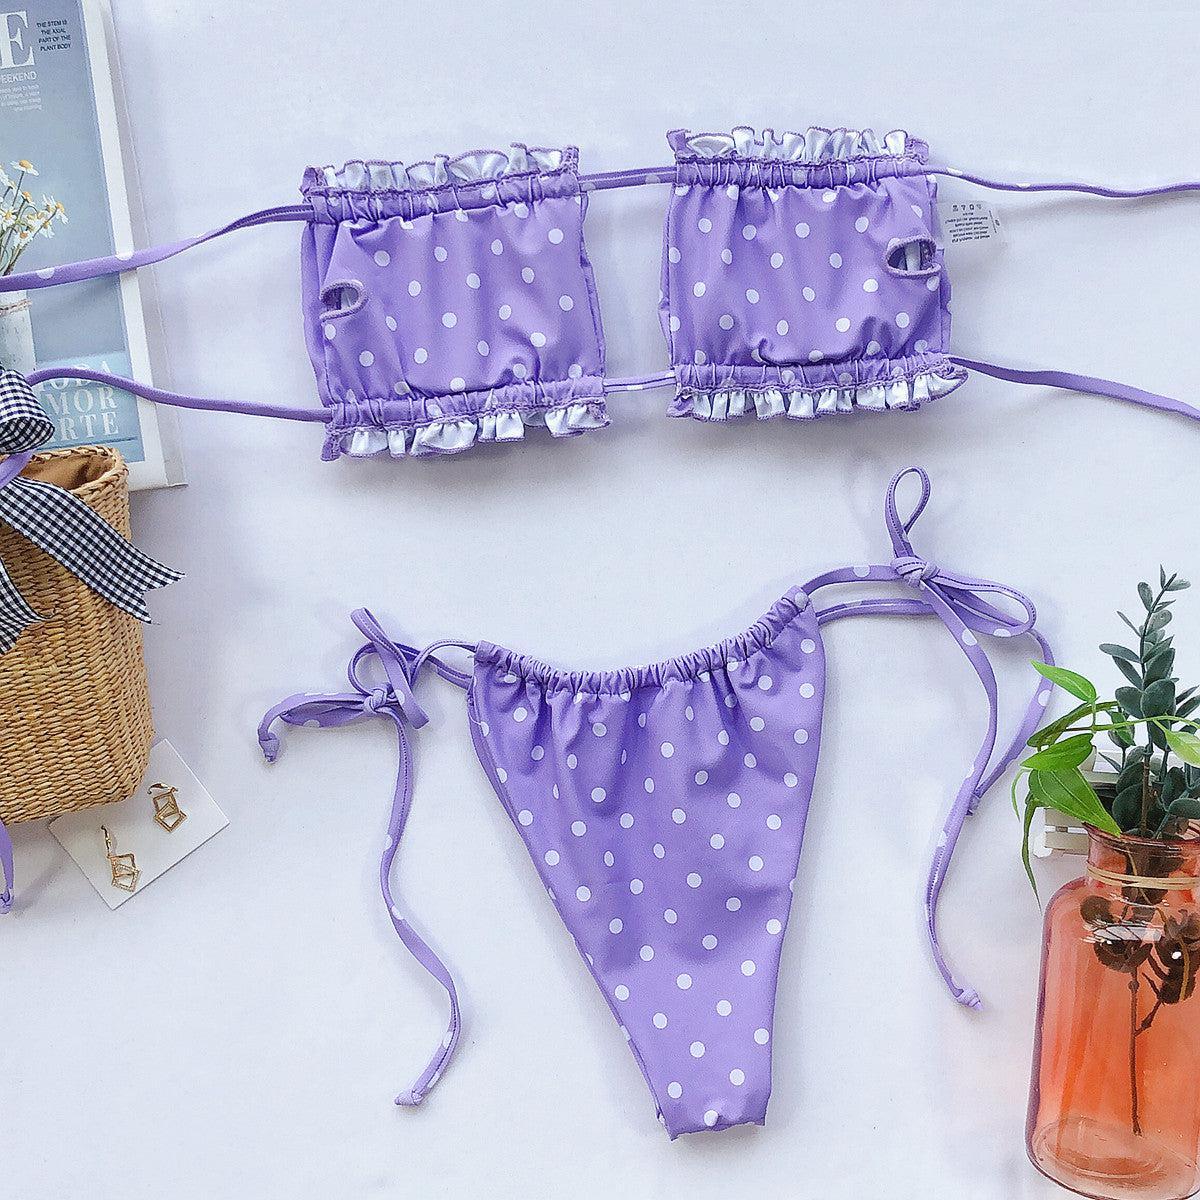 a pair of purple polka dot bikinis next to a potted plant